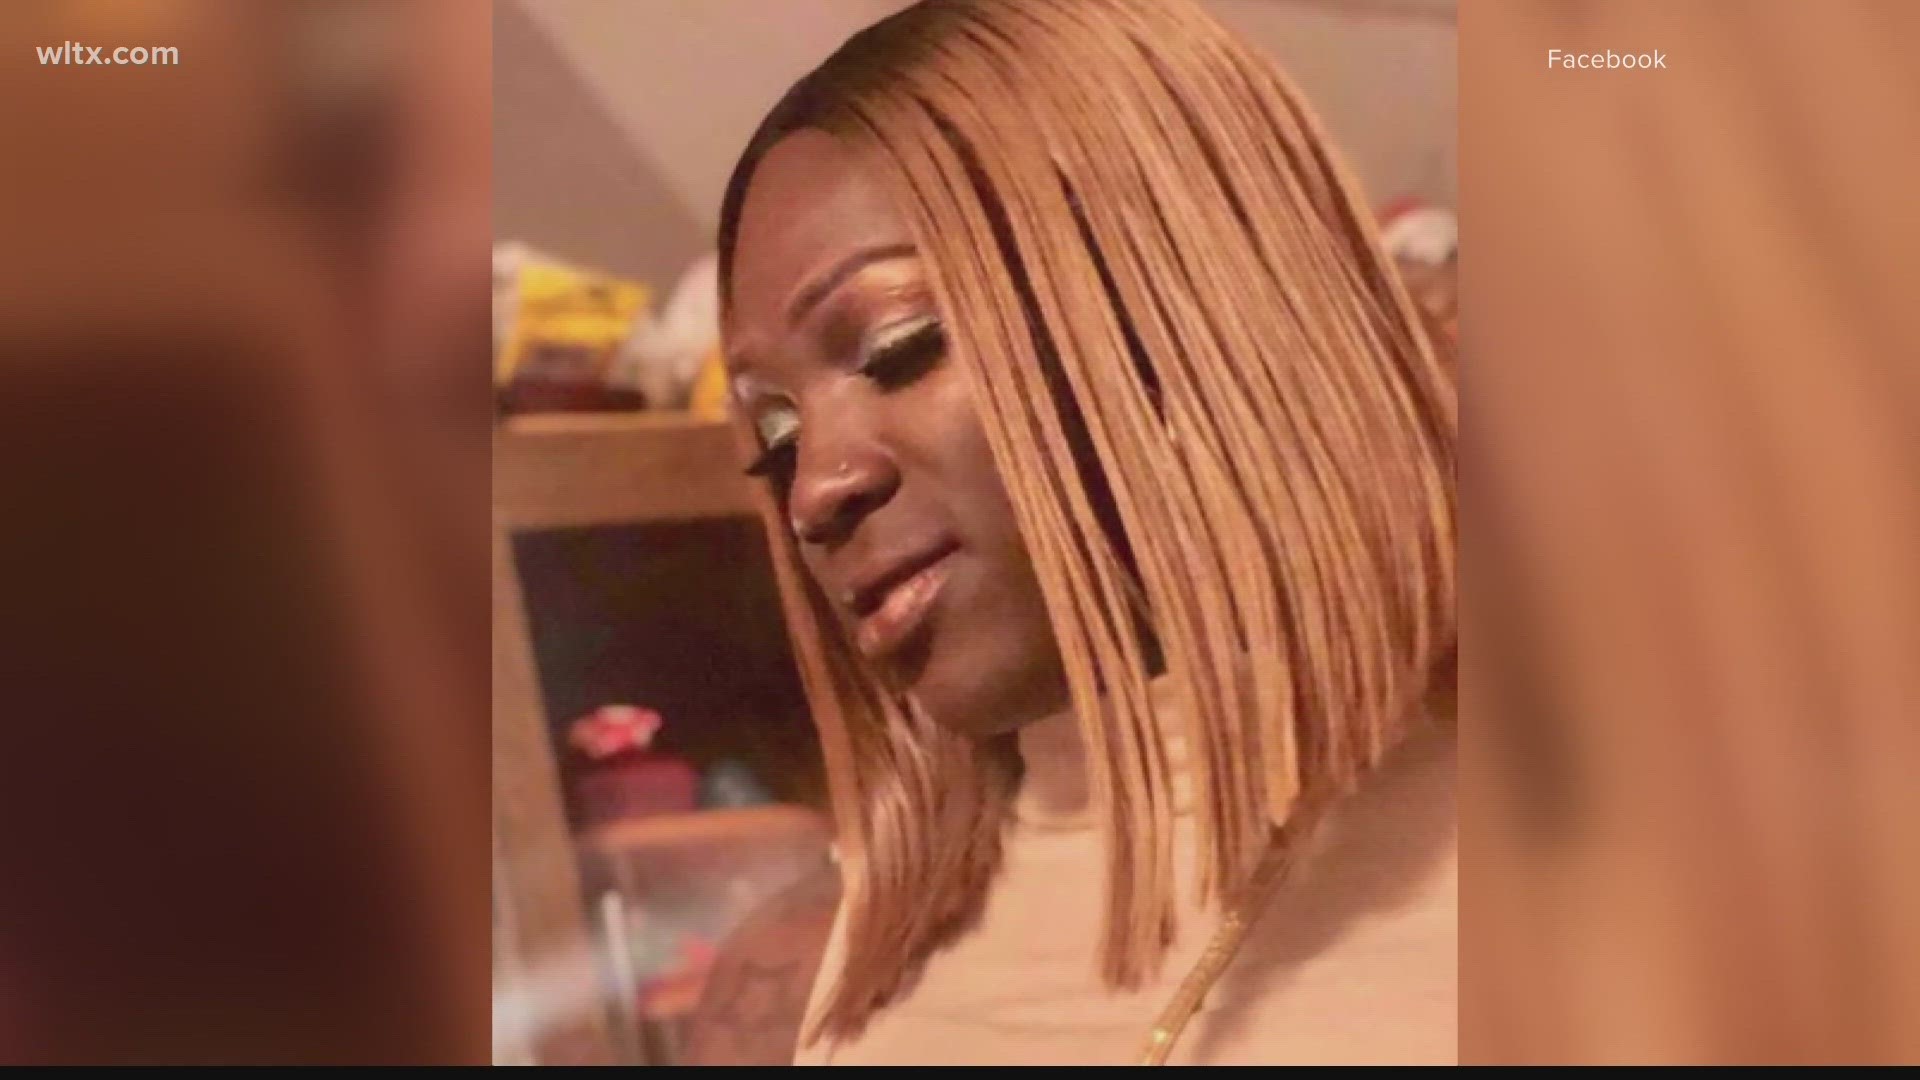 New testimony took place on day three of the federal gender-based hate crime trial in the killing of a transgender woman, Ladime Doe.